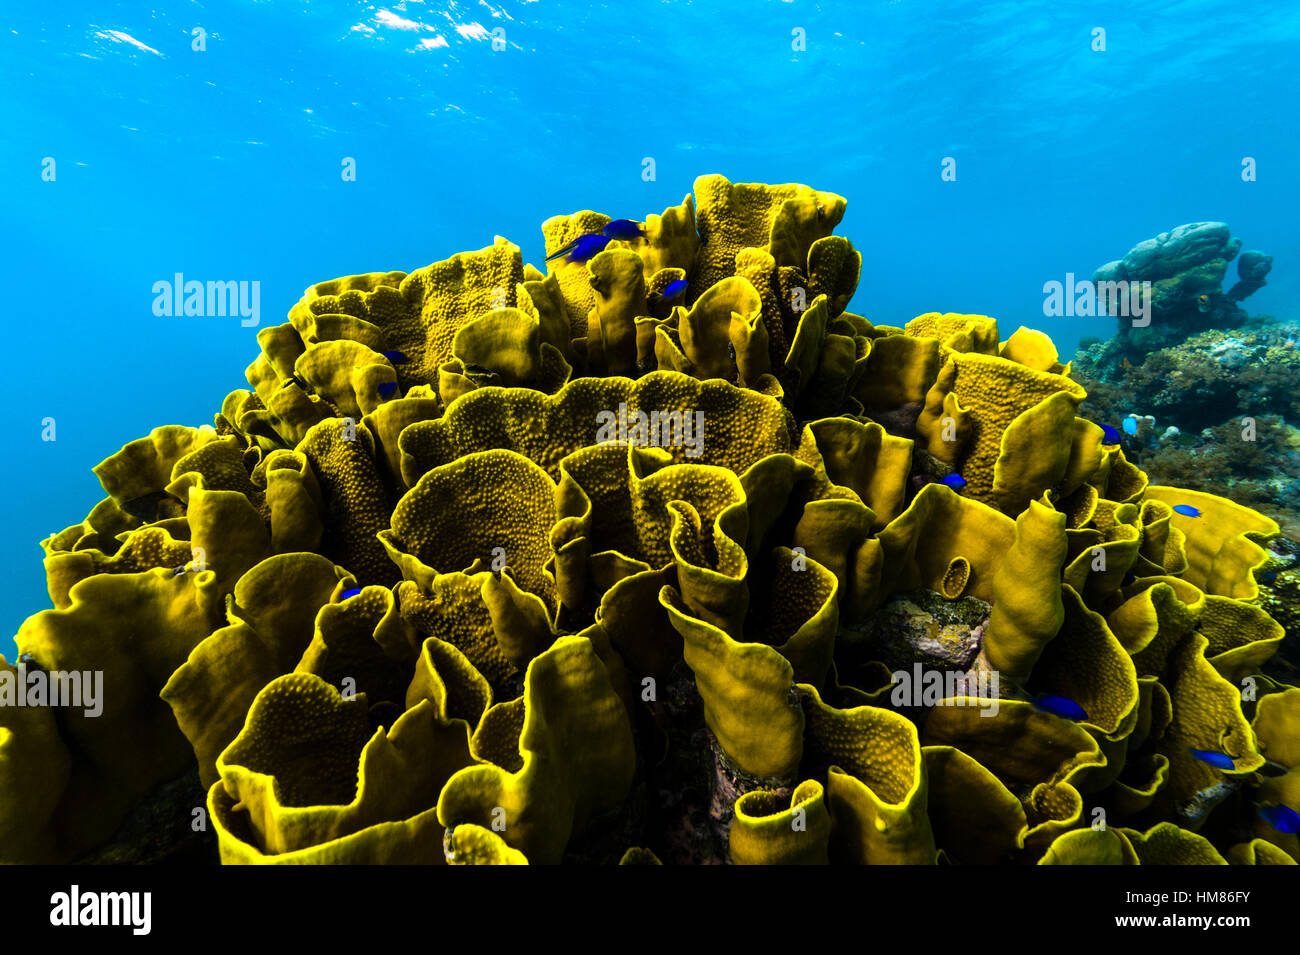 The twisted and wave-like folds of an enormous Vase Coral colony emerging from the ocean floor in a tropical reef. Stock Photo